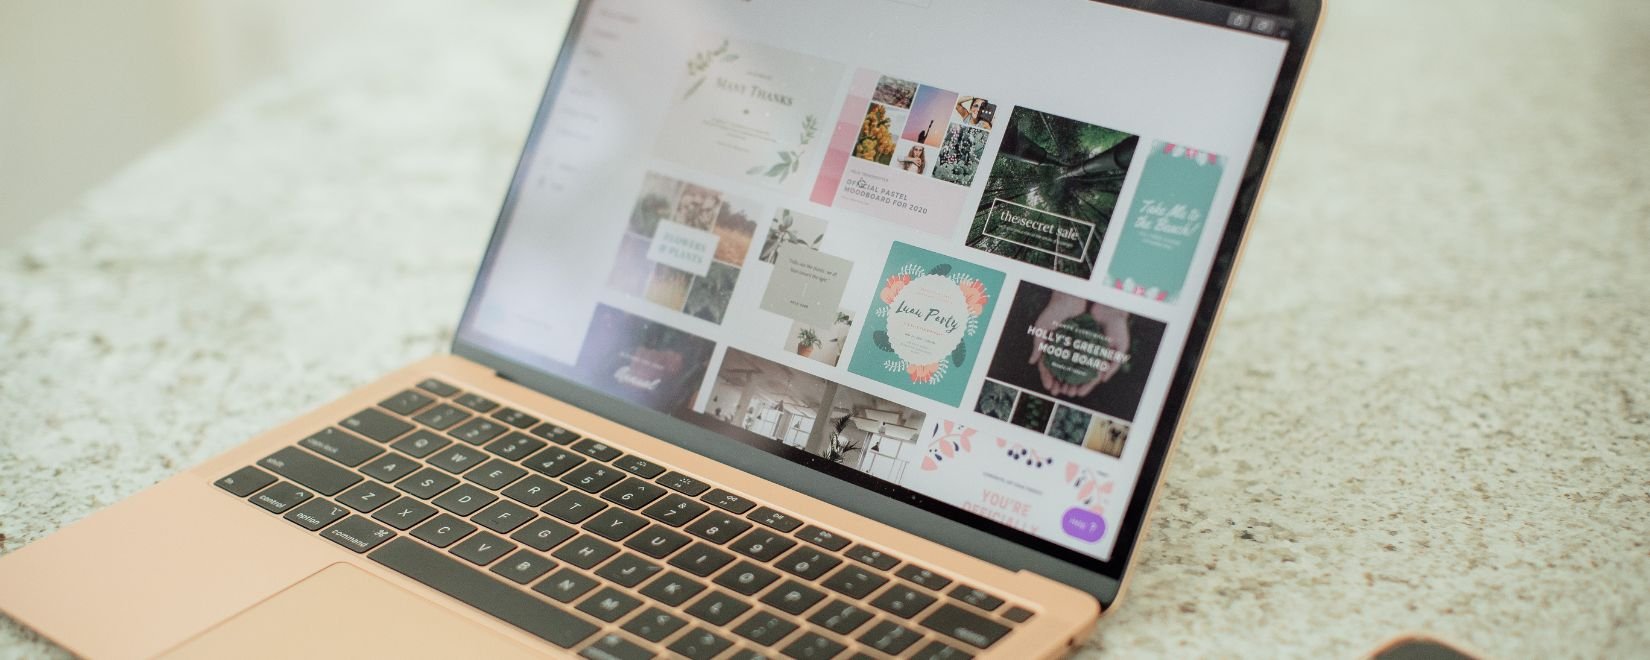 A laptop with the Canva website on screen